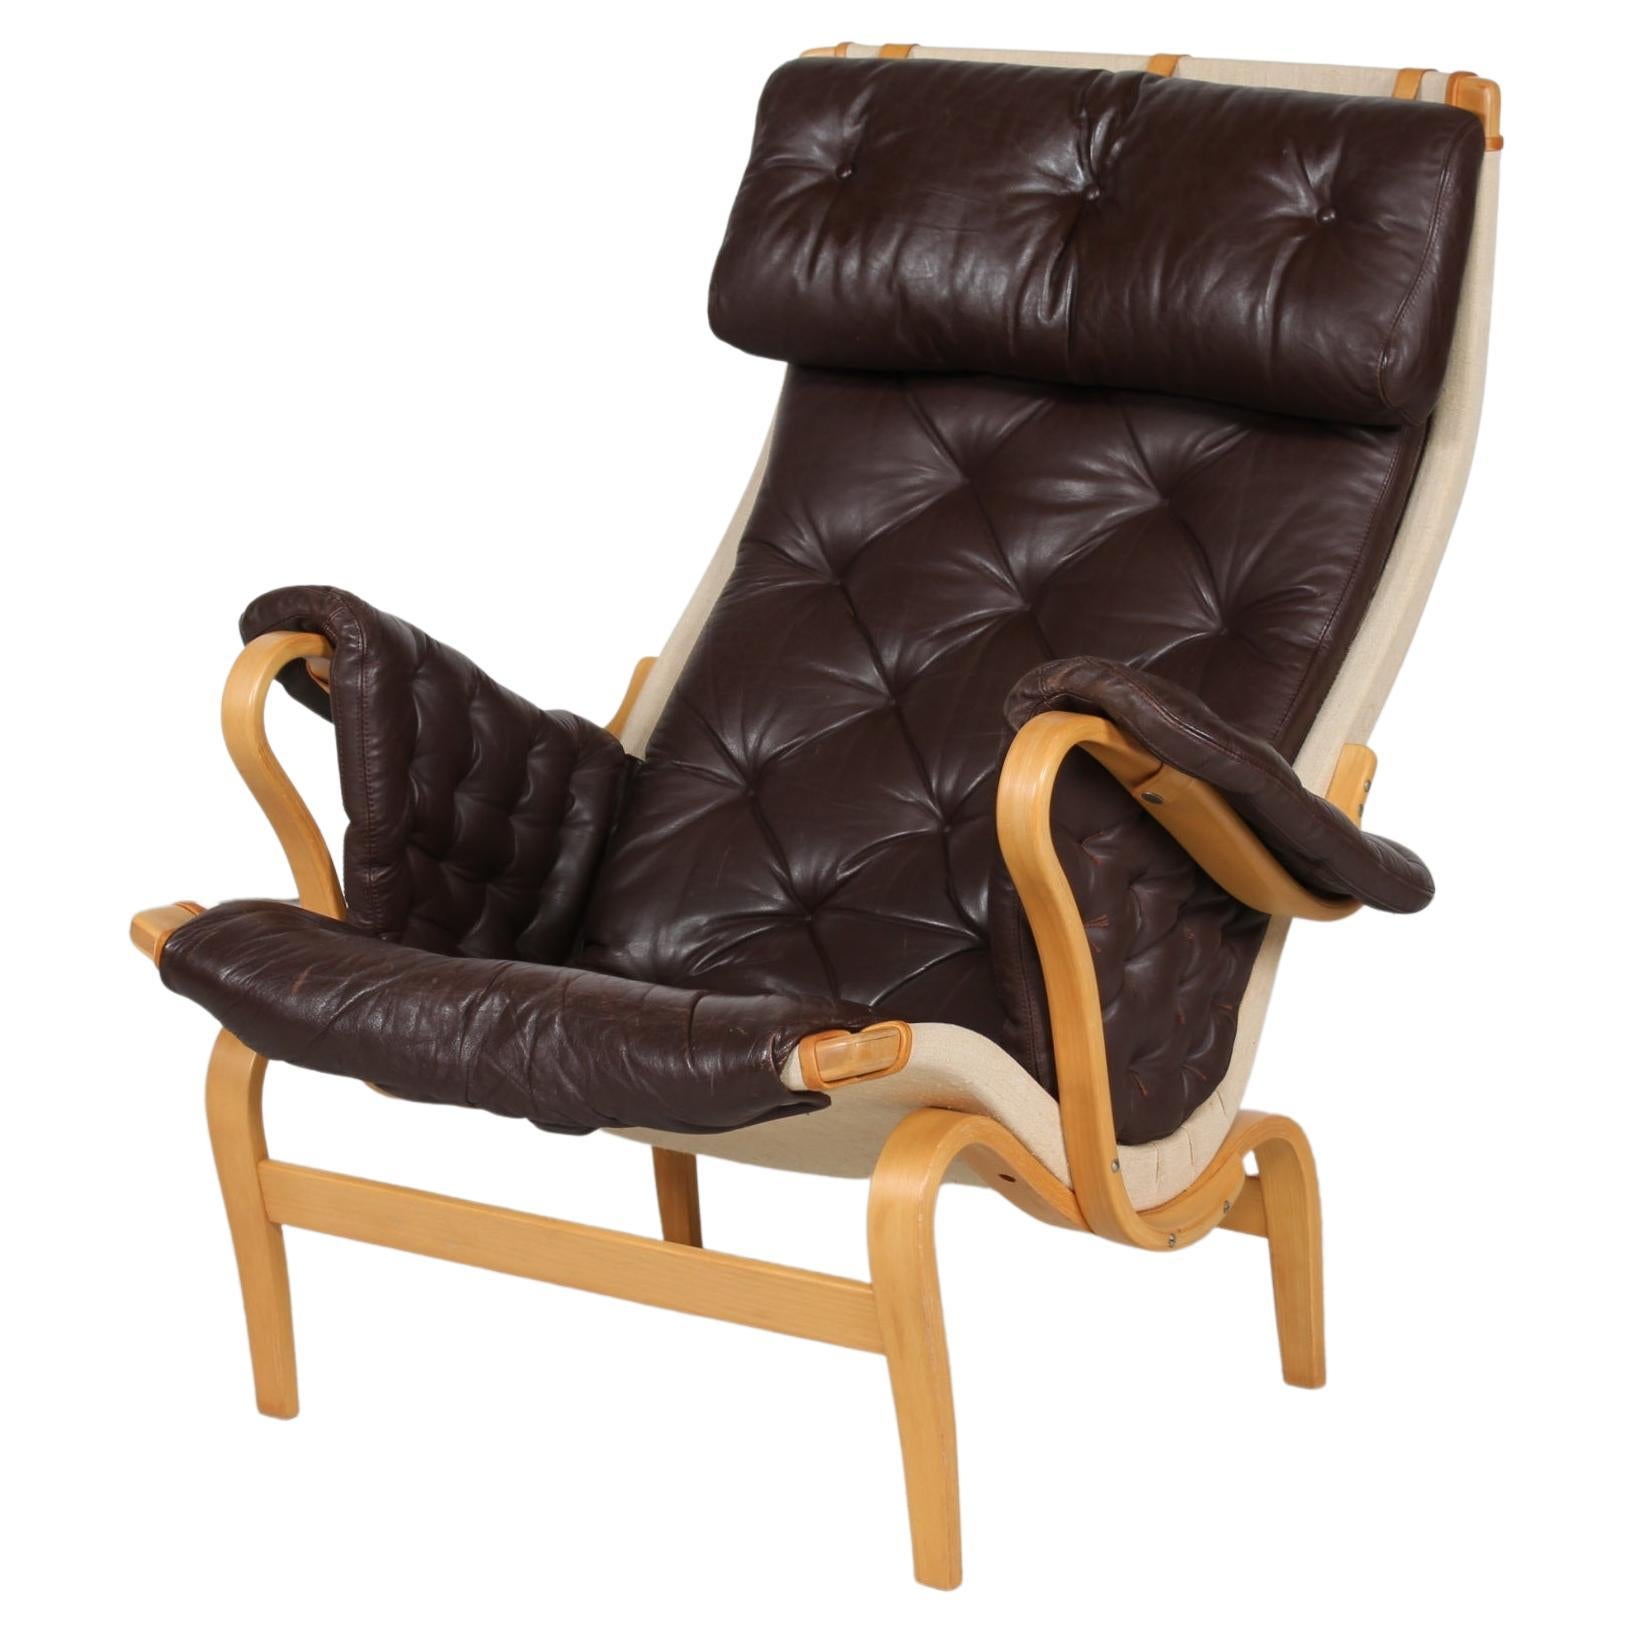 Mid-Century Modern Bruno Mathsson Pernilla Lounge Chair for Dux. Mocha Colored Leather Sweden 1970s For Sale